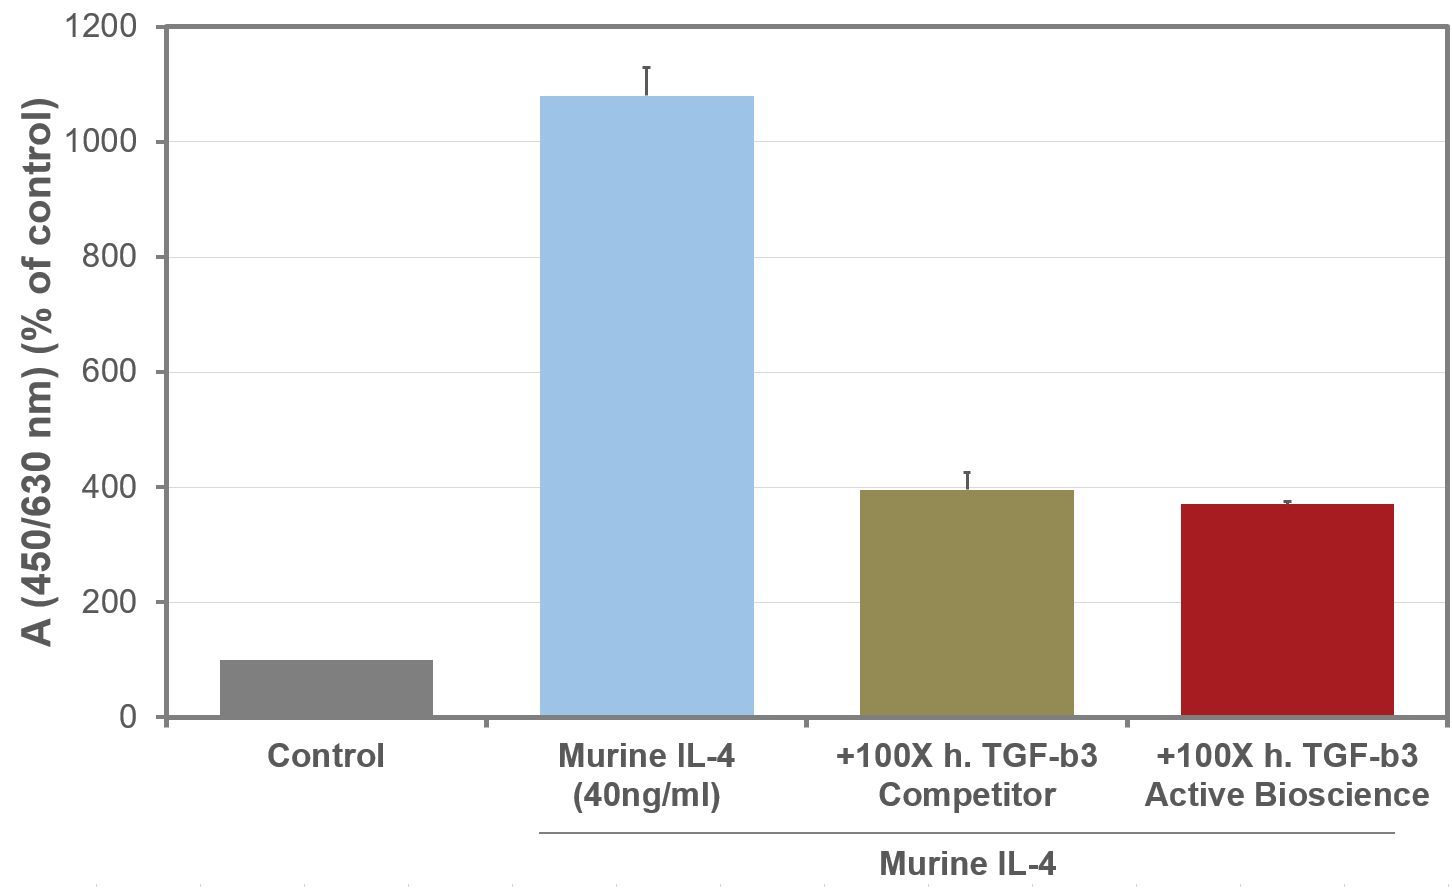 <strong>Fig. 1</strong>: Inhibition of mouse IL4-induced proliferation in HT2 cells by Human TGF-beta3. HT2 cells were stimulated with 40ng/ml mouse IL4 and inhibited with 4�g/ml Human TGF-beta3. Values are the means (�SD) of triplicate determinations and expressed as percentage of control.